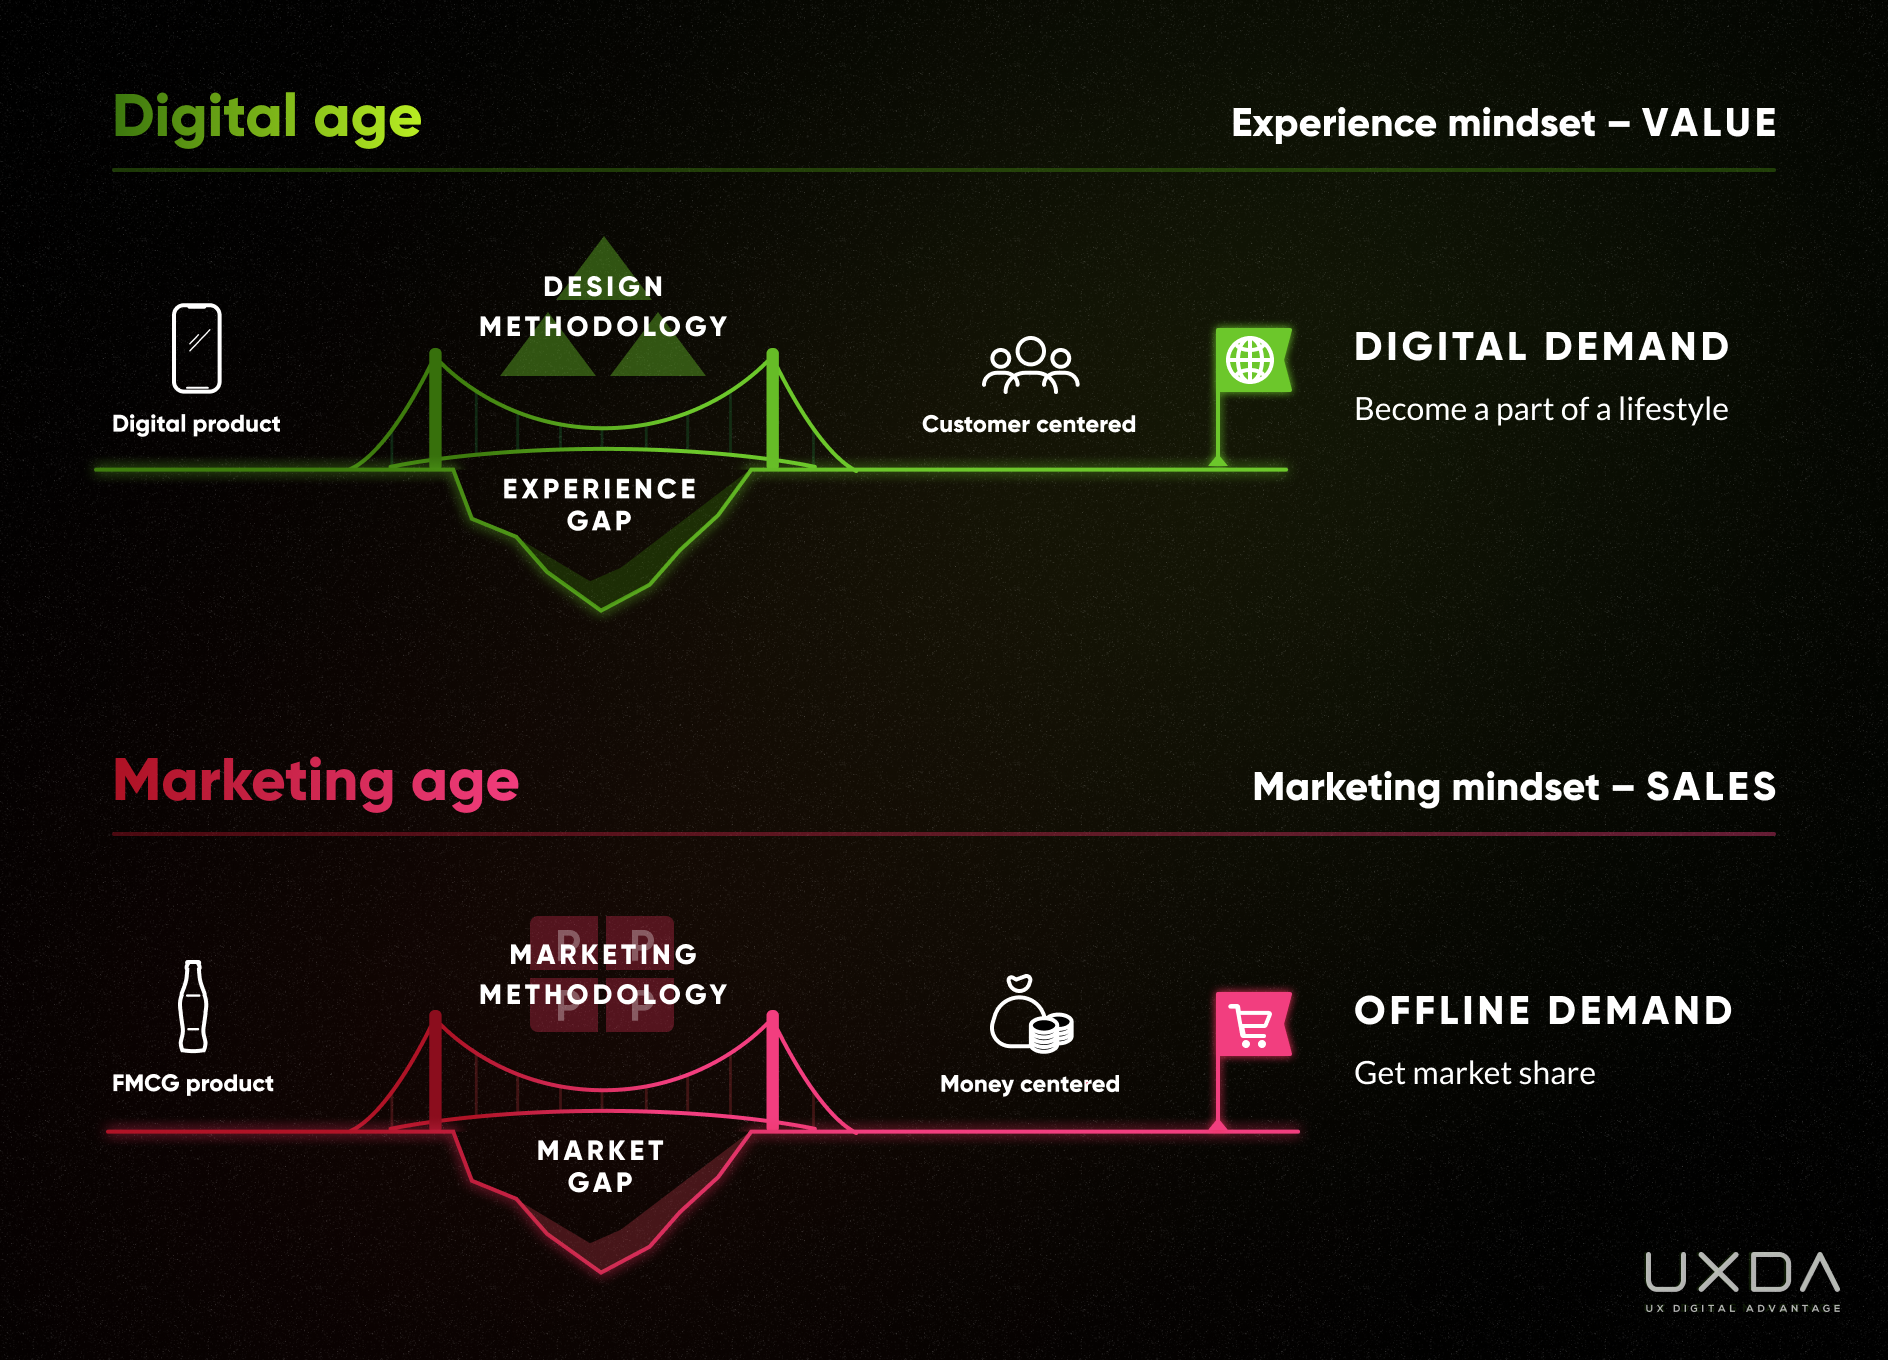 UX Design Approach Adapt Financial Brand Digital Age Metaverse transformation experience mindset value